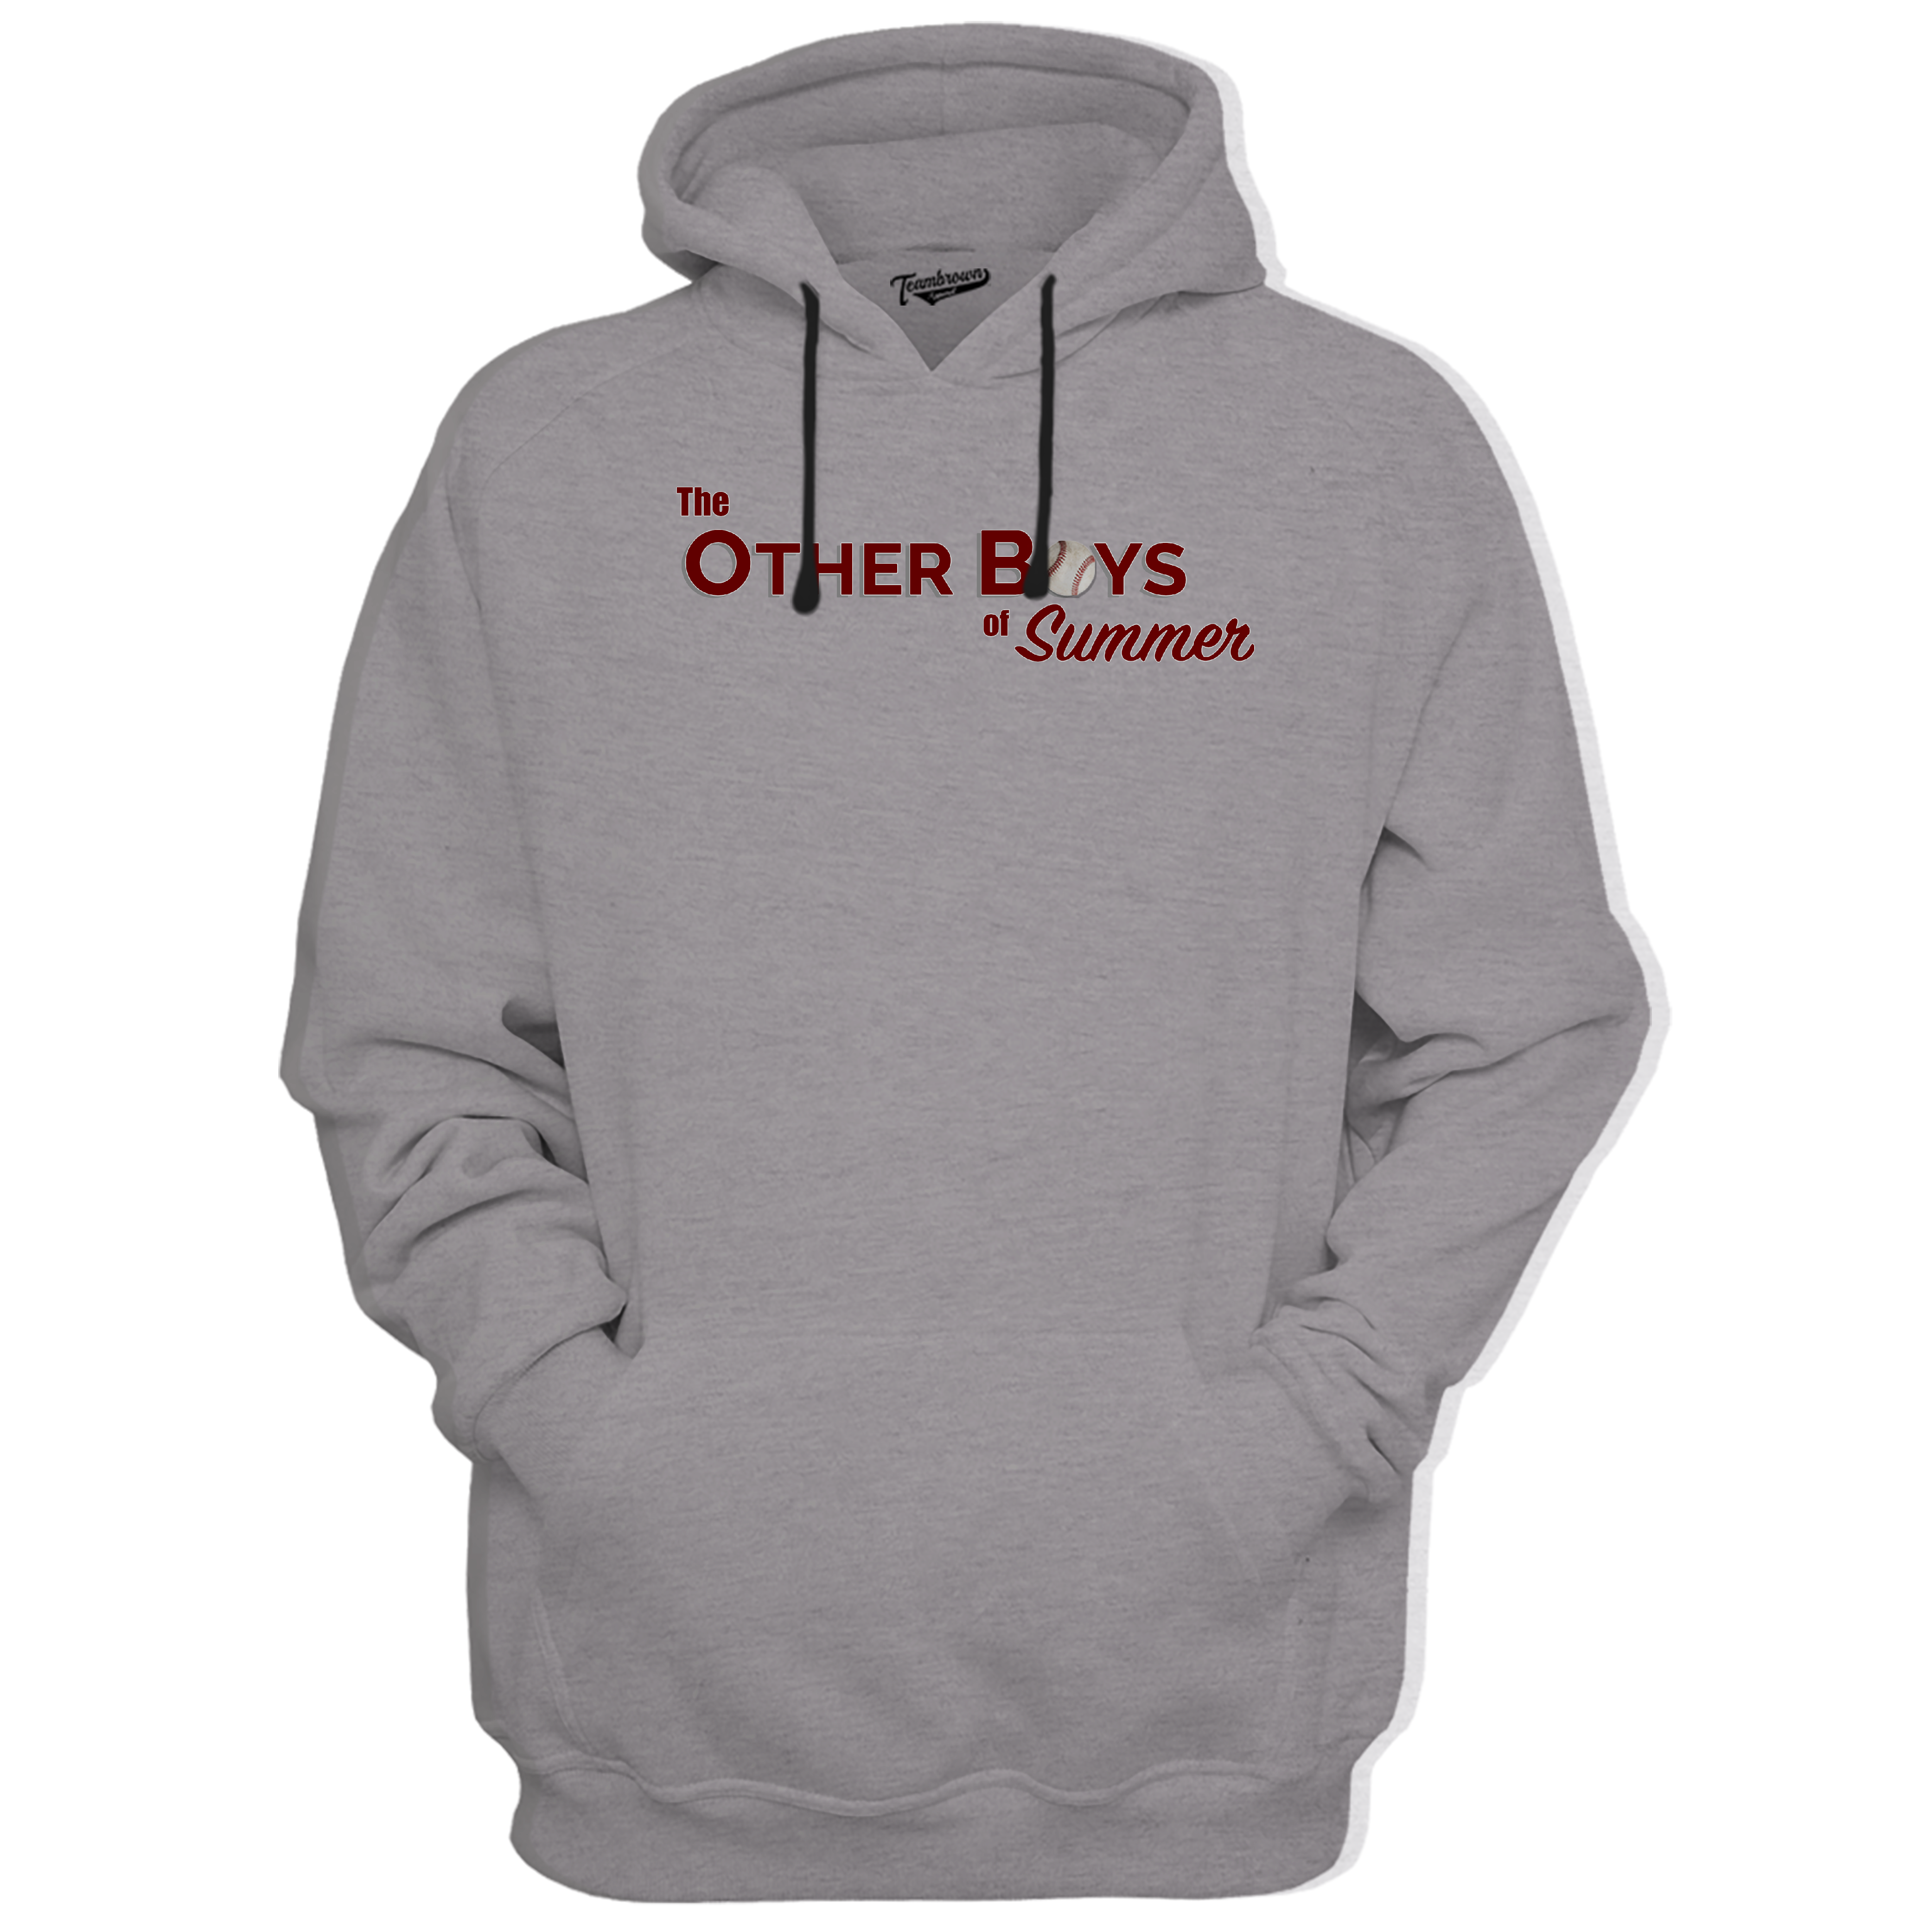 The Other Boys of Summer - Unisex Premium Hoodie | Officially Licensed - The Other Boys of Summer